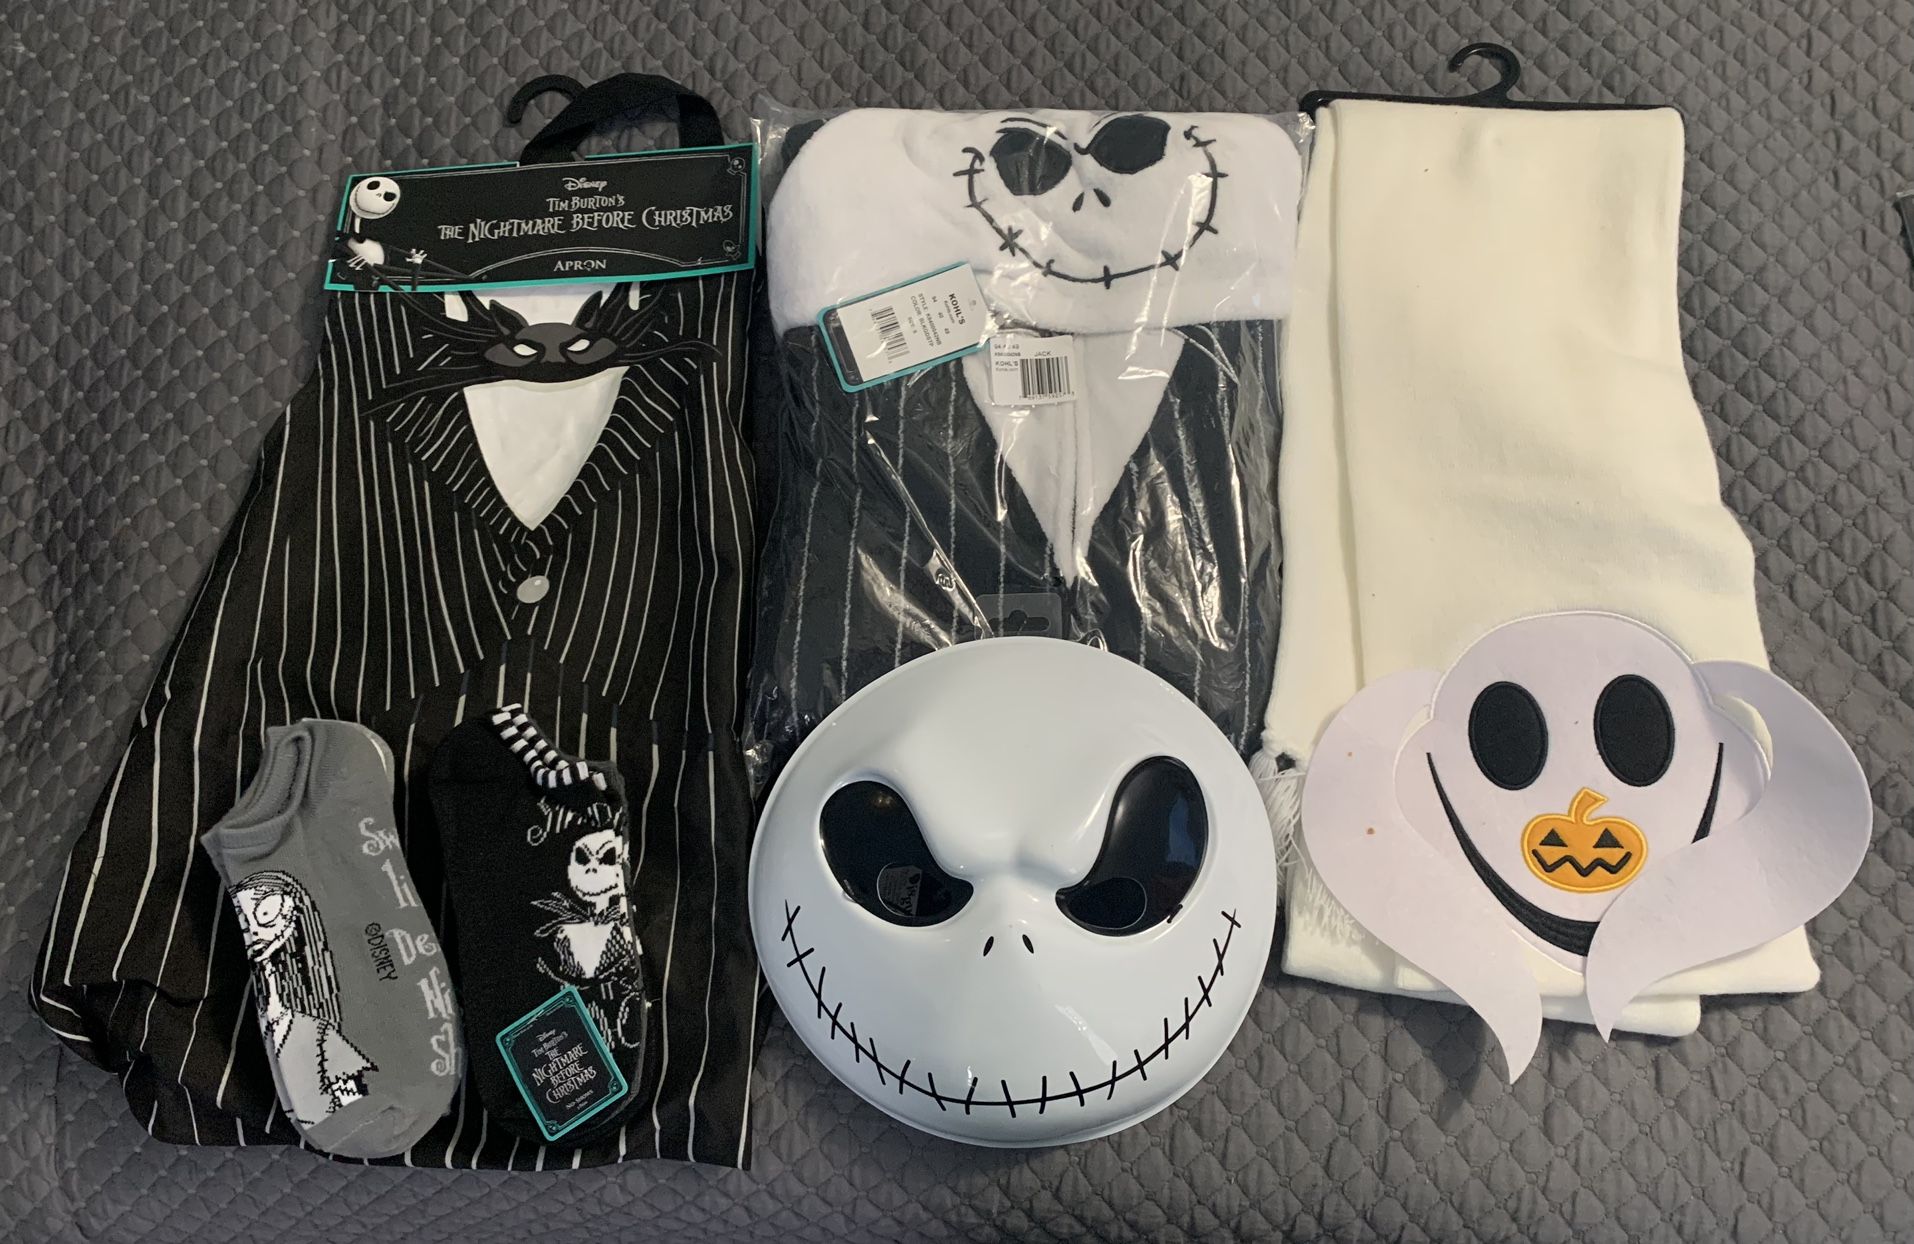 Nightmare Before Christmas - Clothes, Apron and More